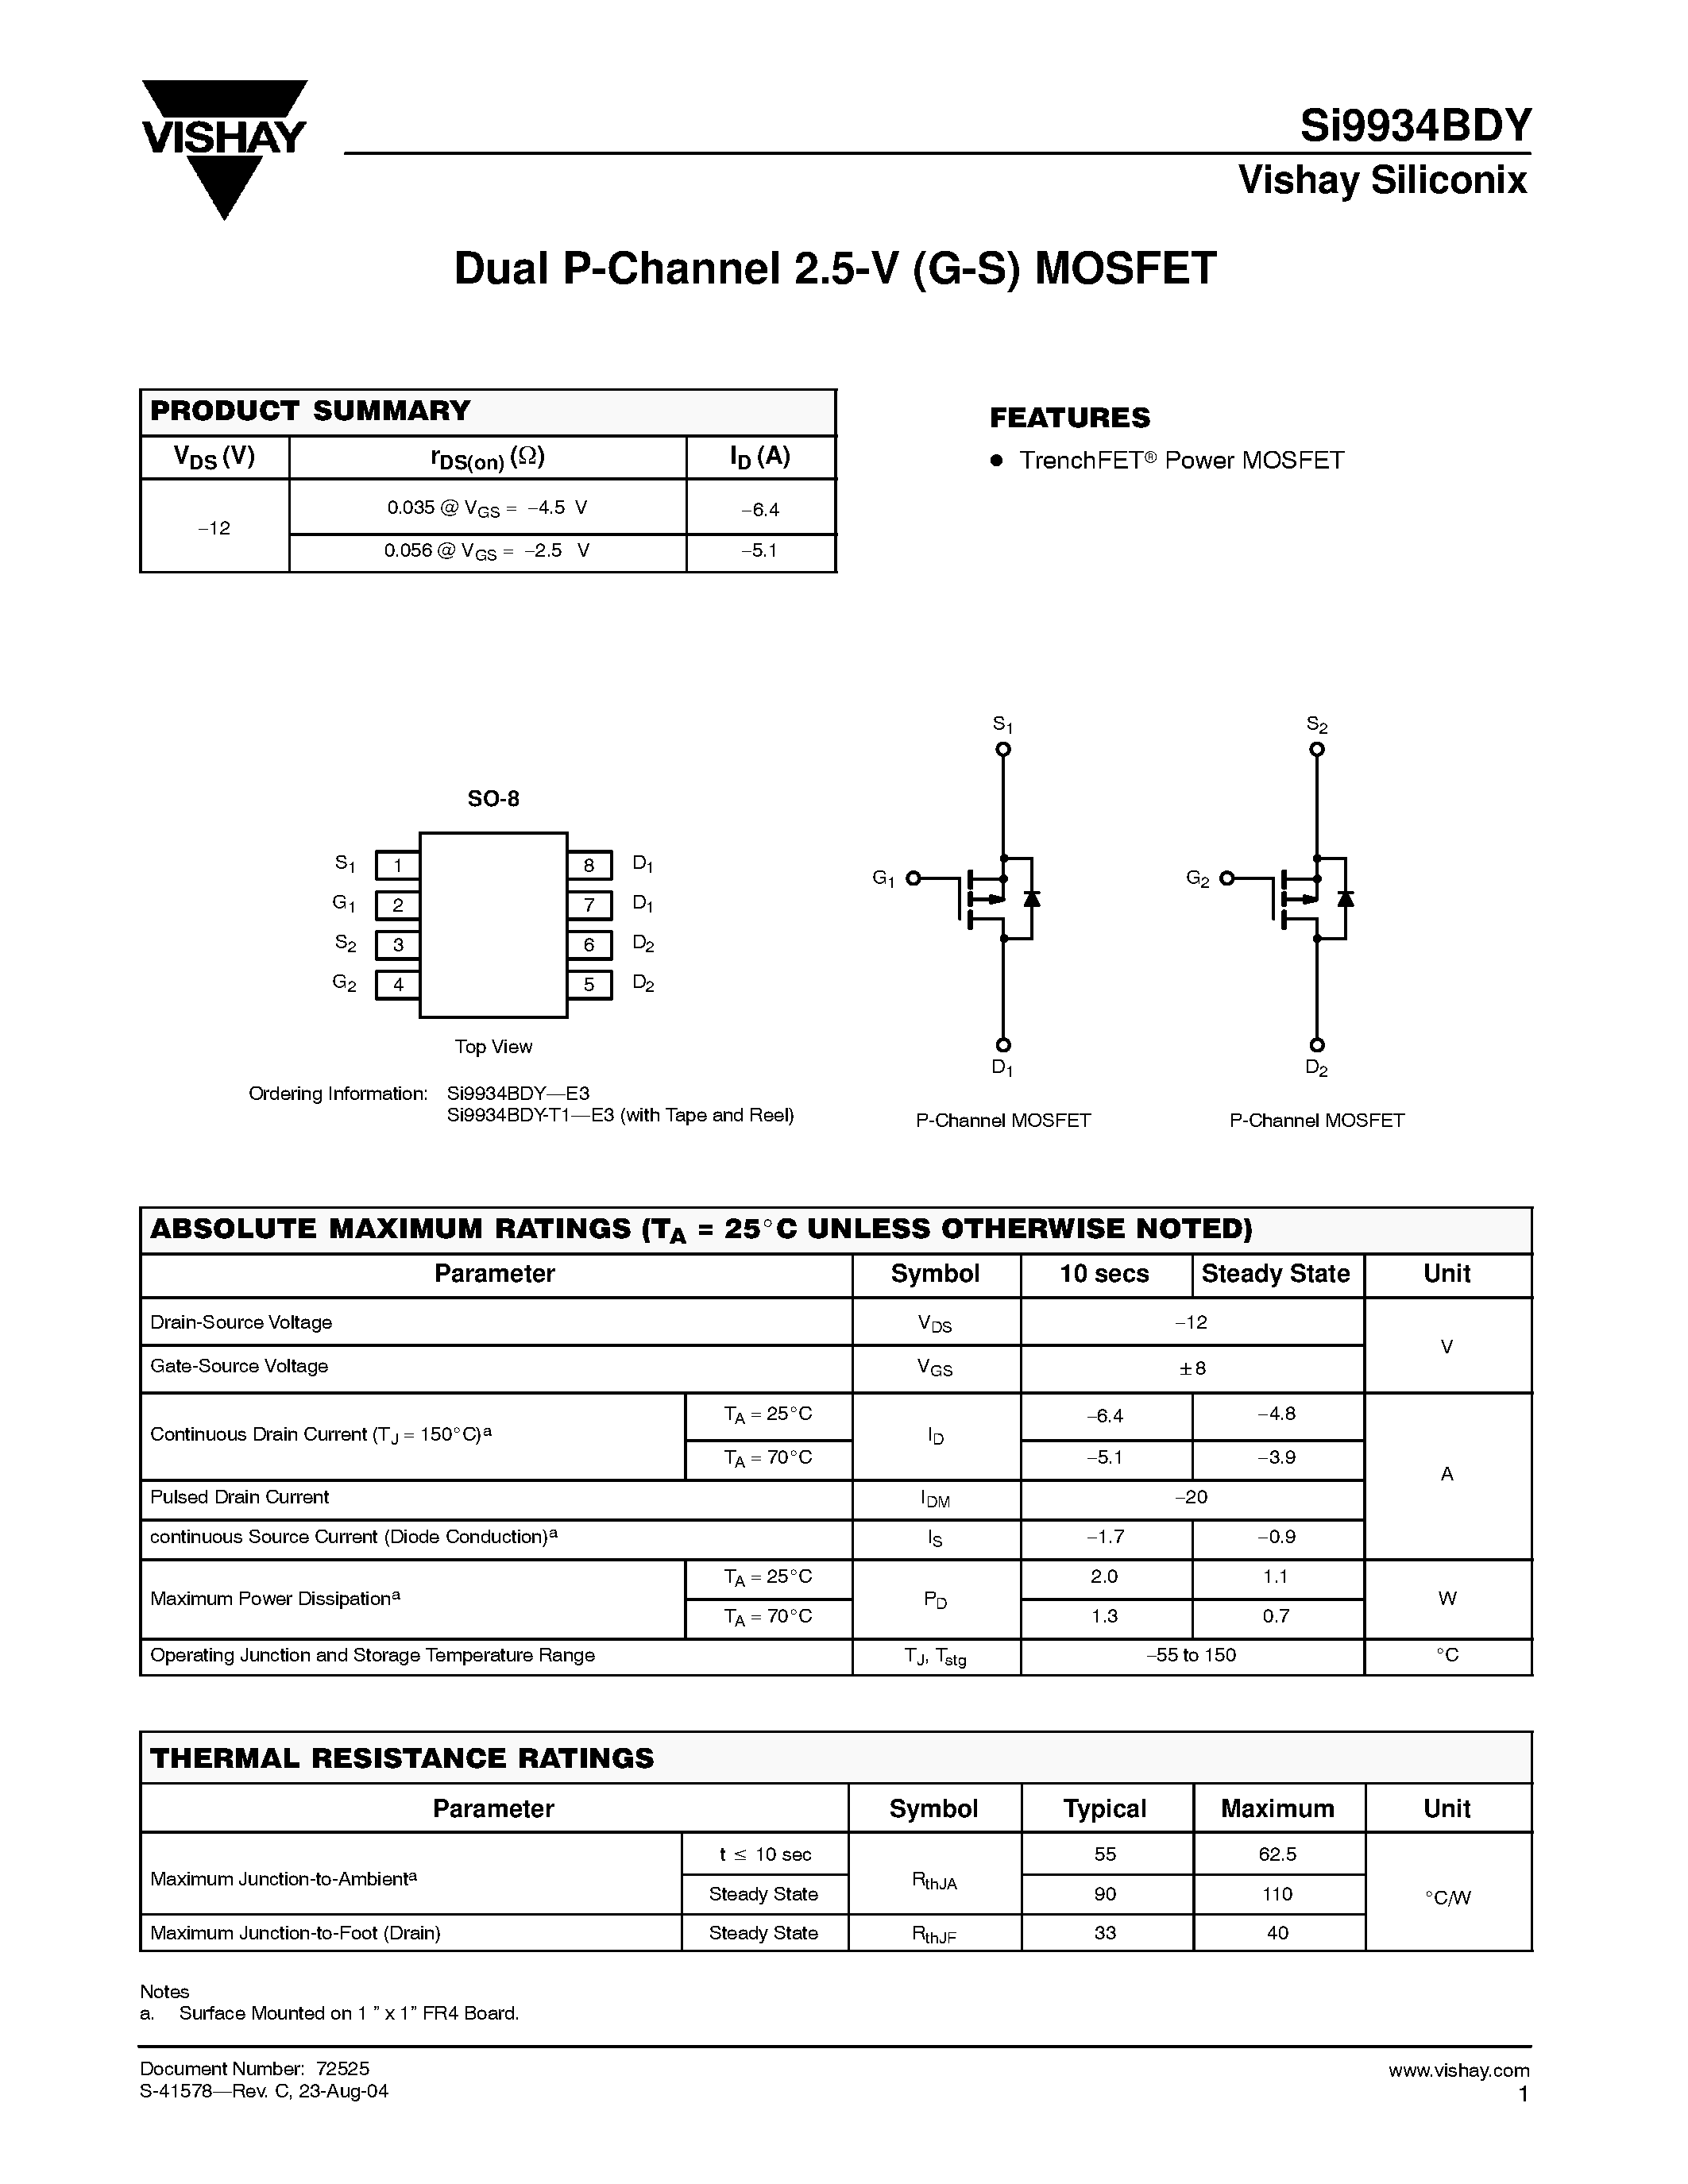 Даташит SI9934BDY-E3 - Dual P-Channel 2.5-V (G-S) MOSFET страница 1